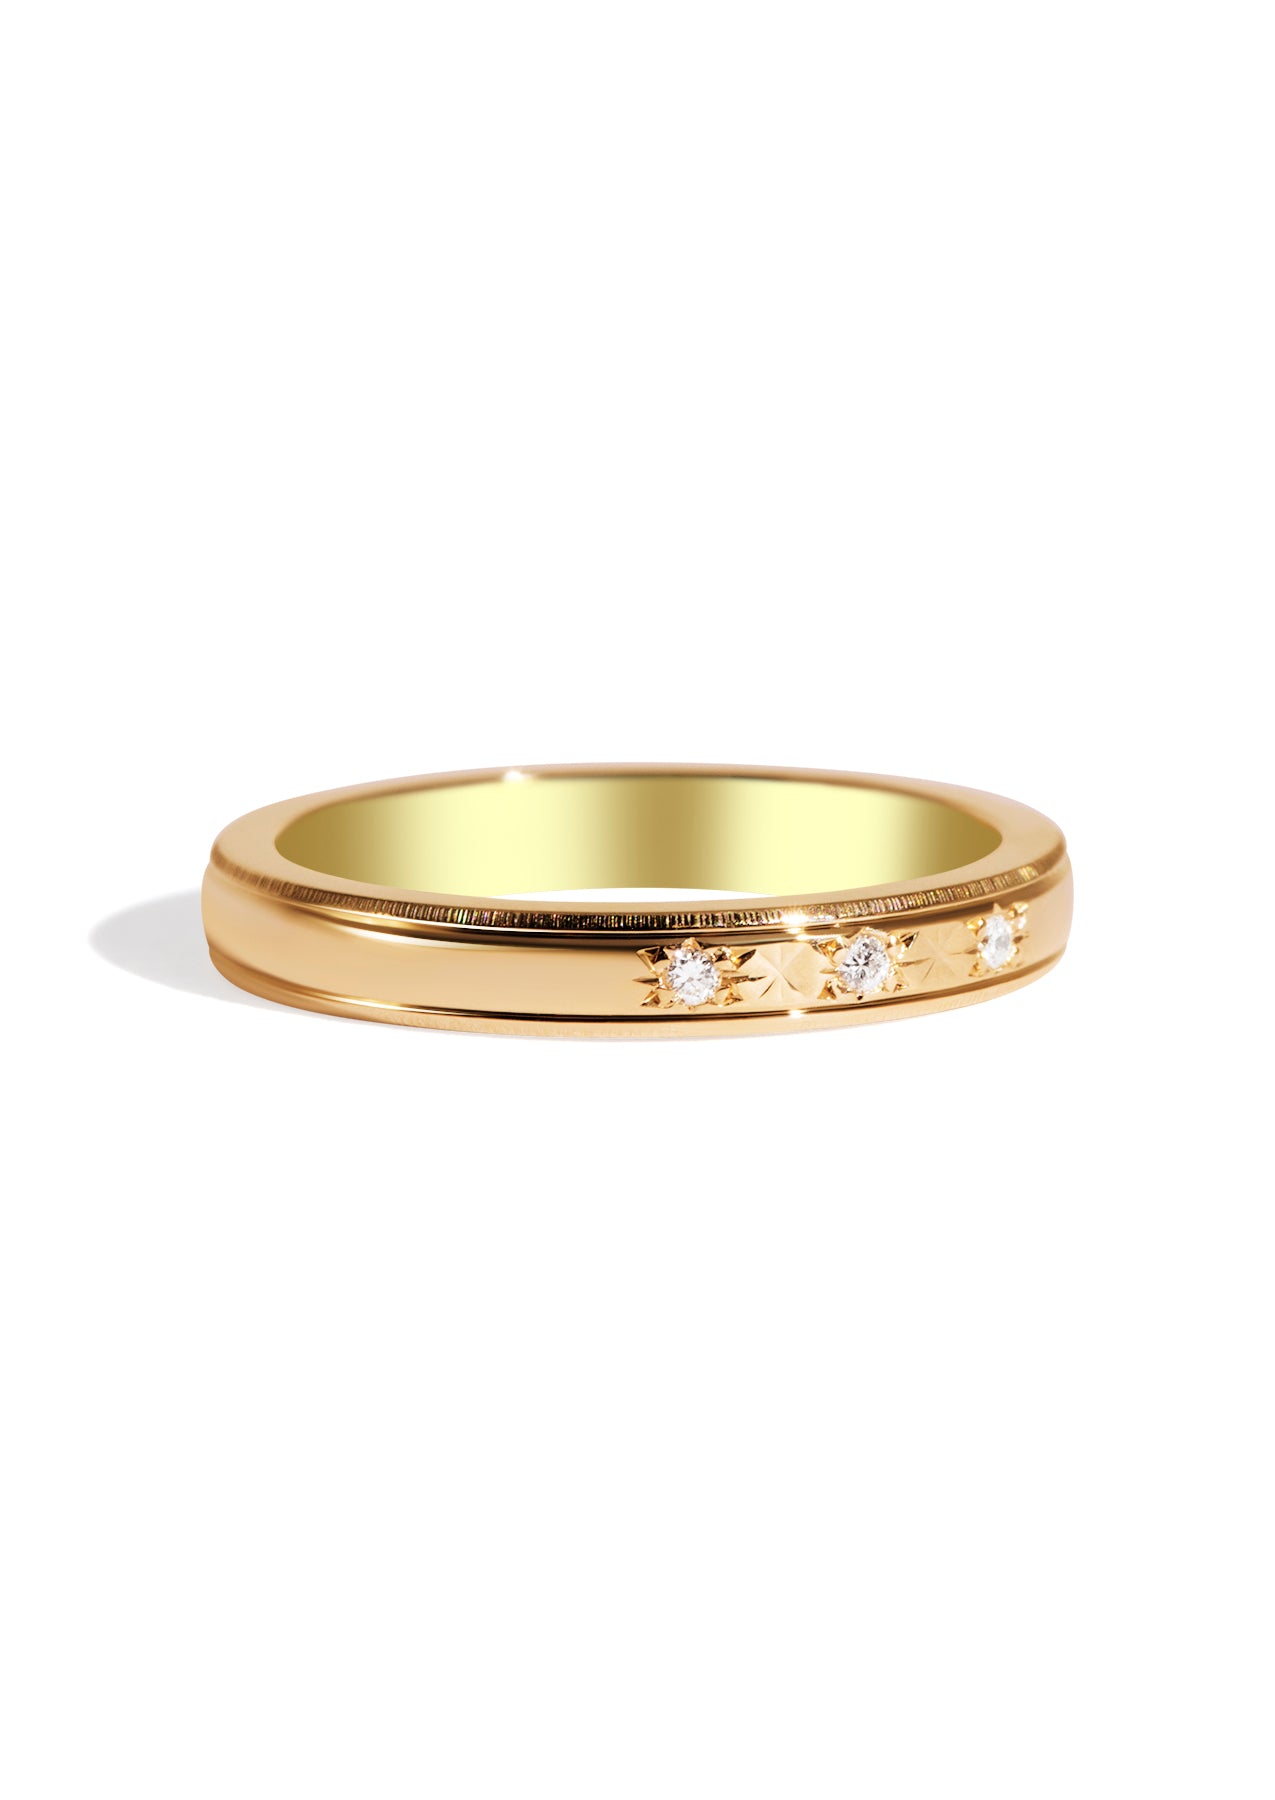 The Spell Yellow Gold Band